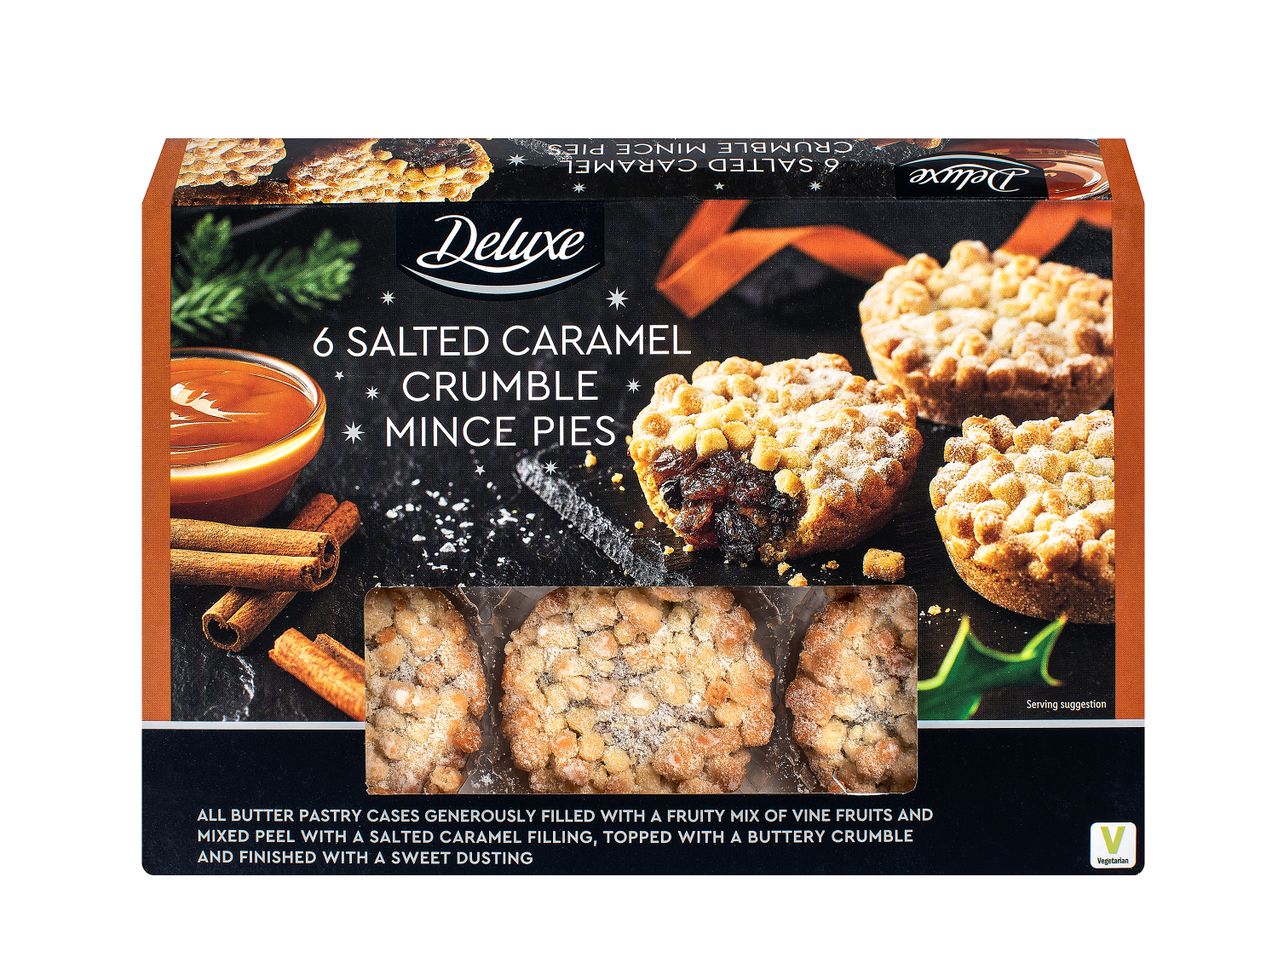 Go to full screen view: Deluxe Crumble Top Flavoured Mince Pies - Image 1